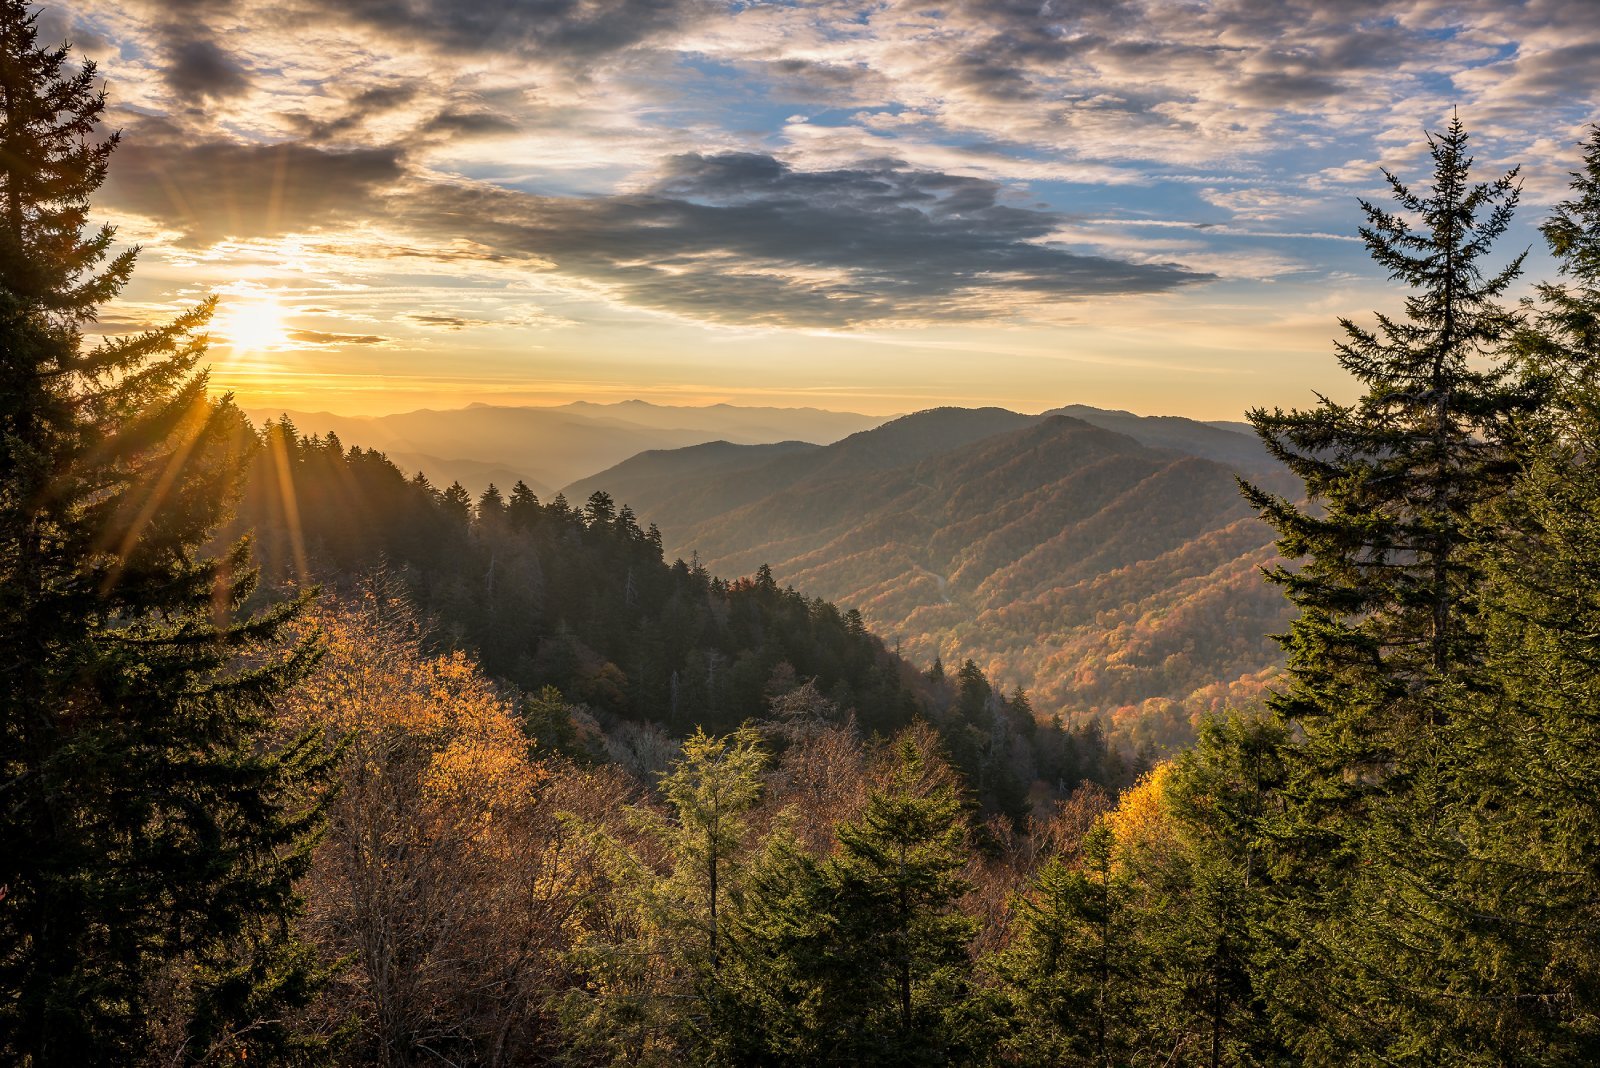 <p class="wp-caption-text">Image Credit: Shutterstock / anthony heflin</p>  <p><span>Straddling the border between North Carolina and Tennessee, Great Smoky Mountains National Park is a UNESCO World Heritage Site and the most visited national park in the United States. The park is renowned for its biodiversity, ancient mountains, and a vast collection of historic buildings.</span></p>